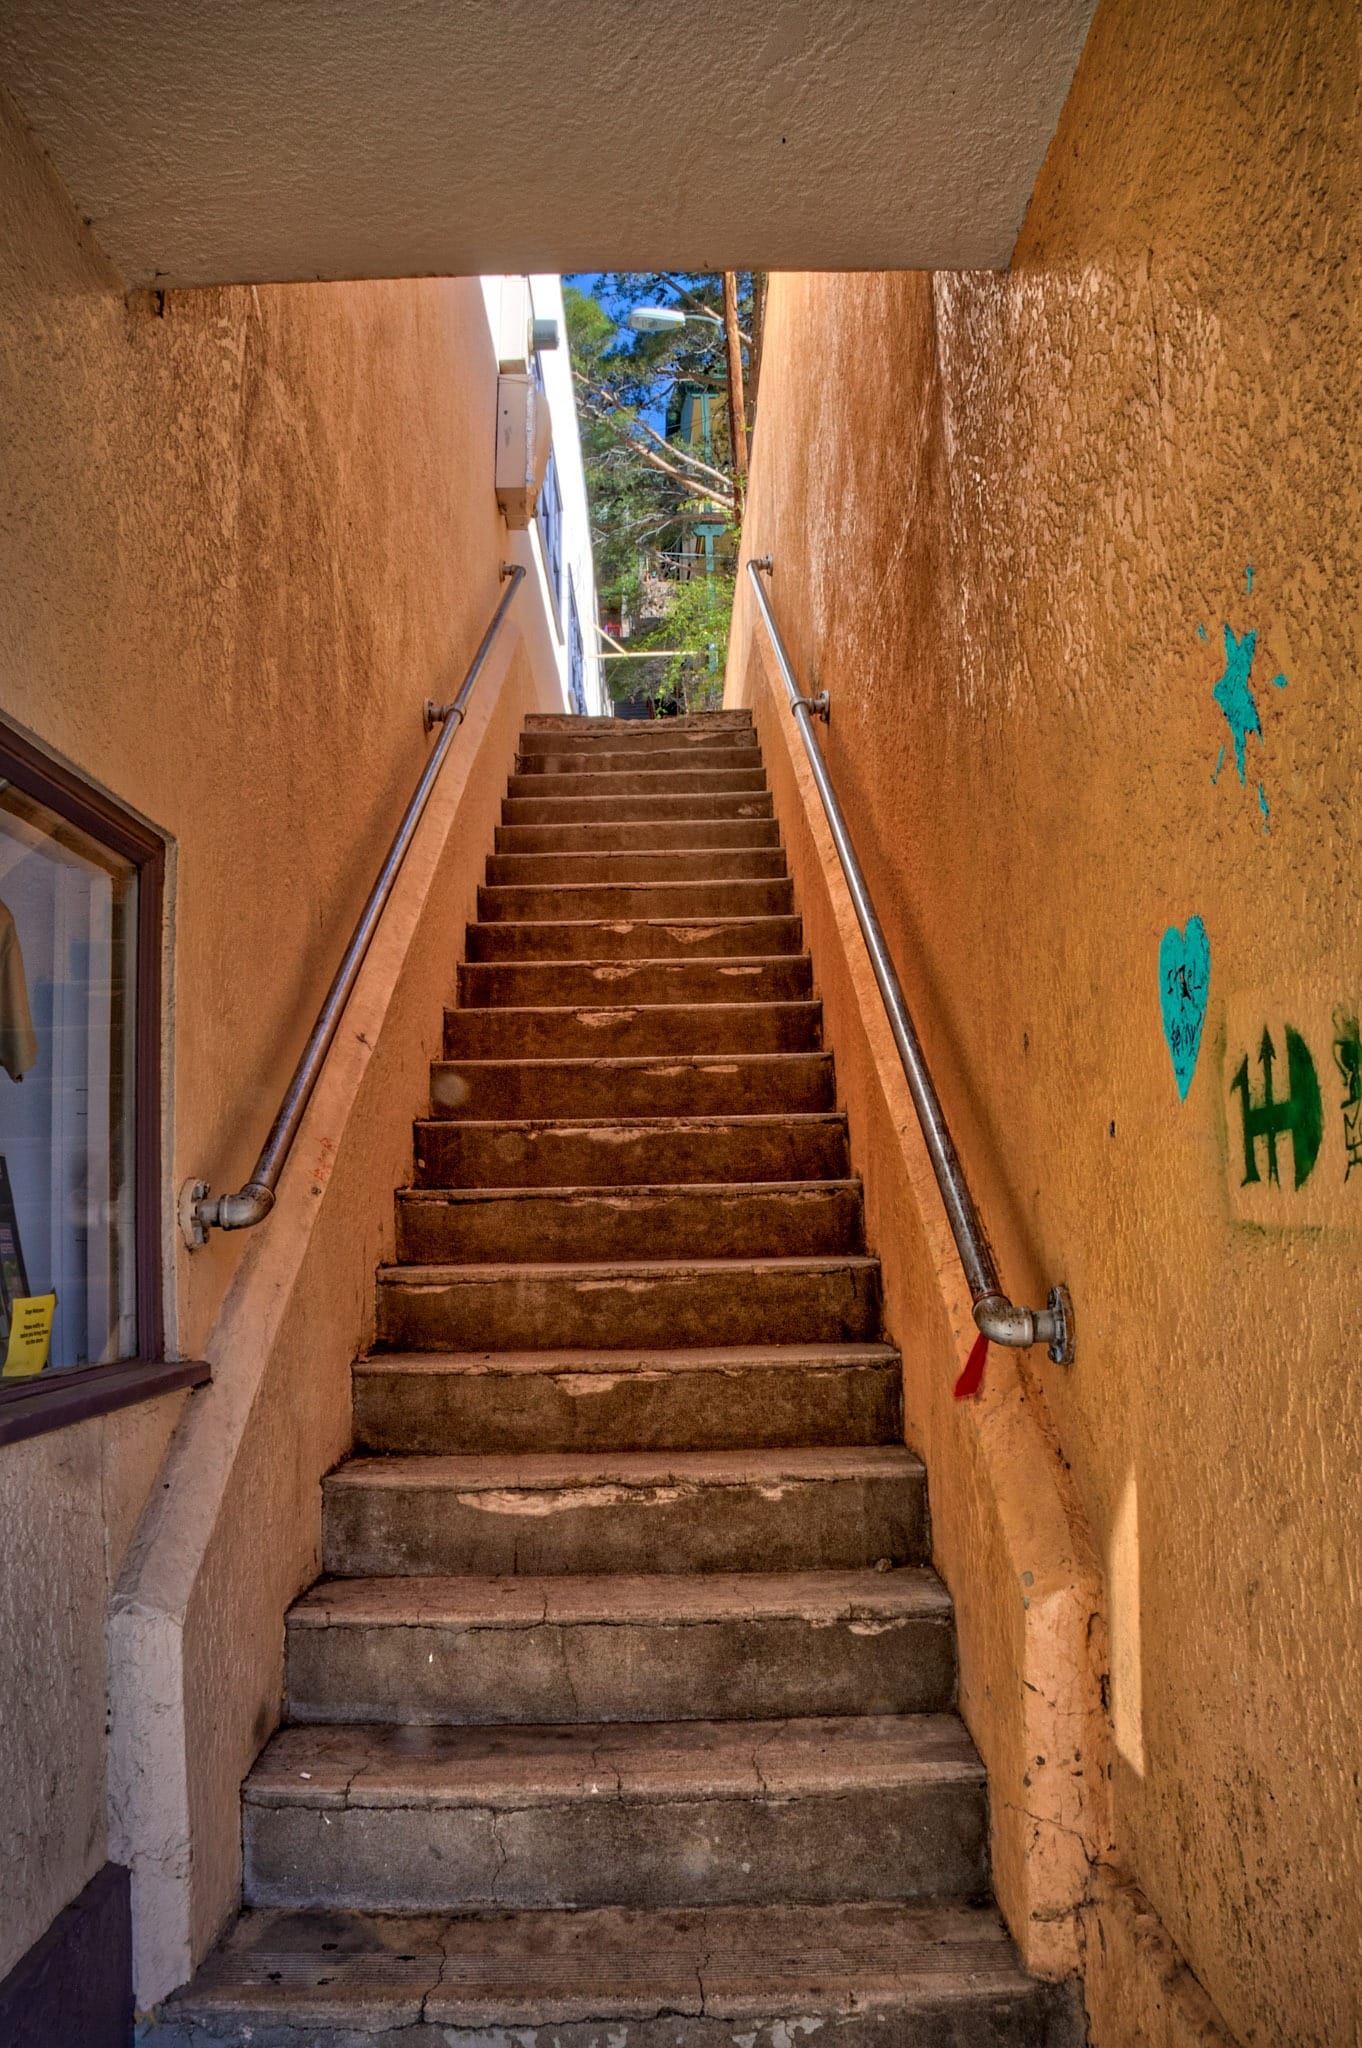 This staircase goes from Tombstone Canyon Road up to Castle Rock in Bisbee, Arizona.